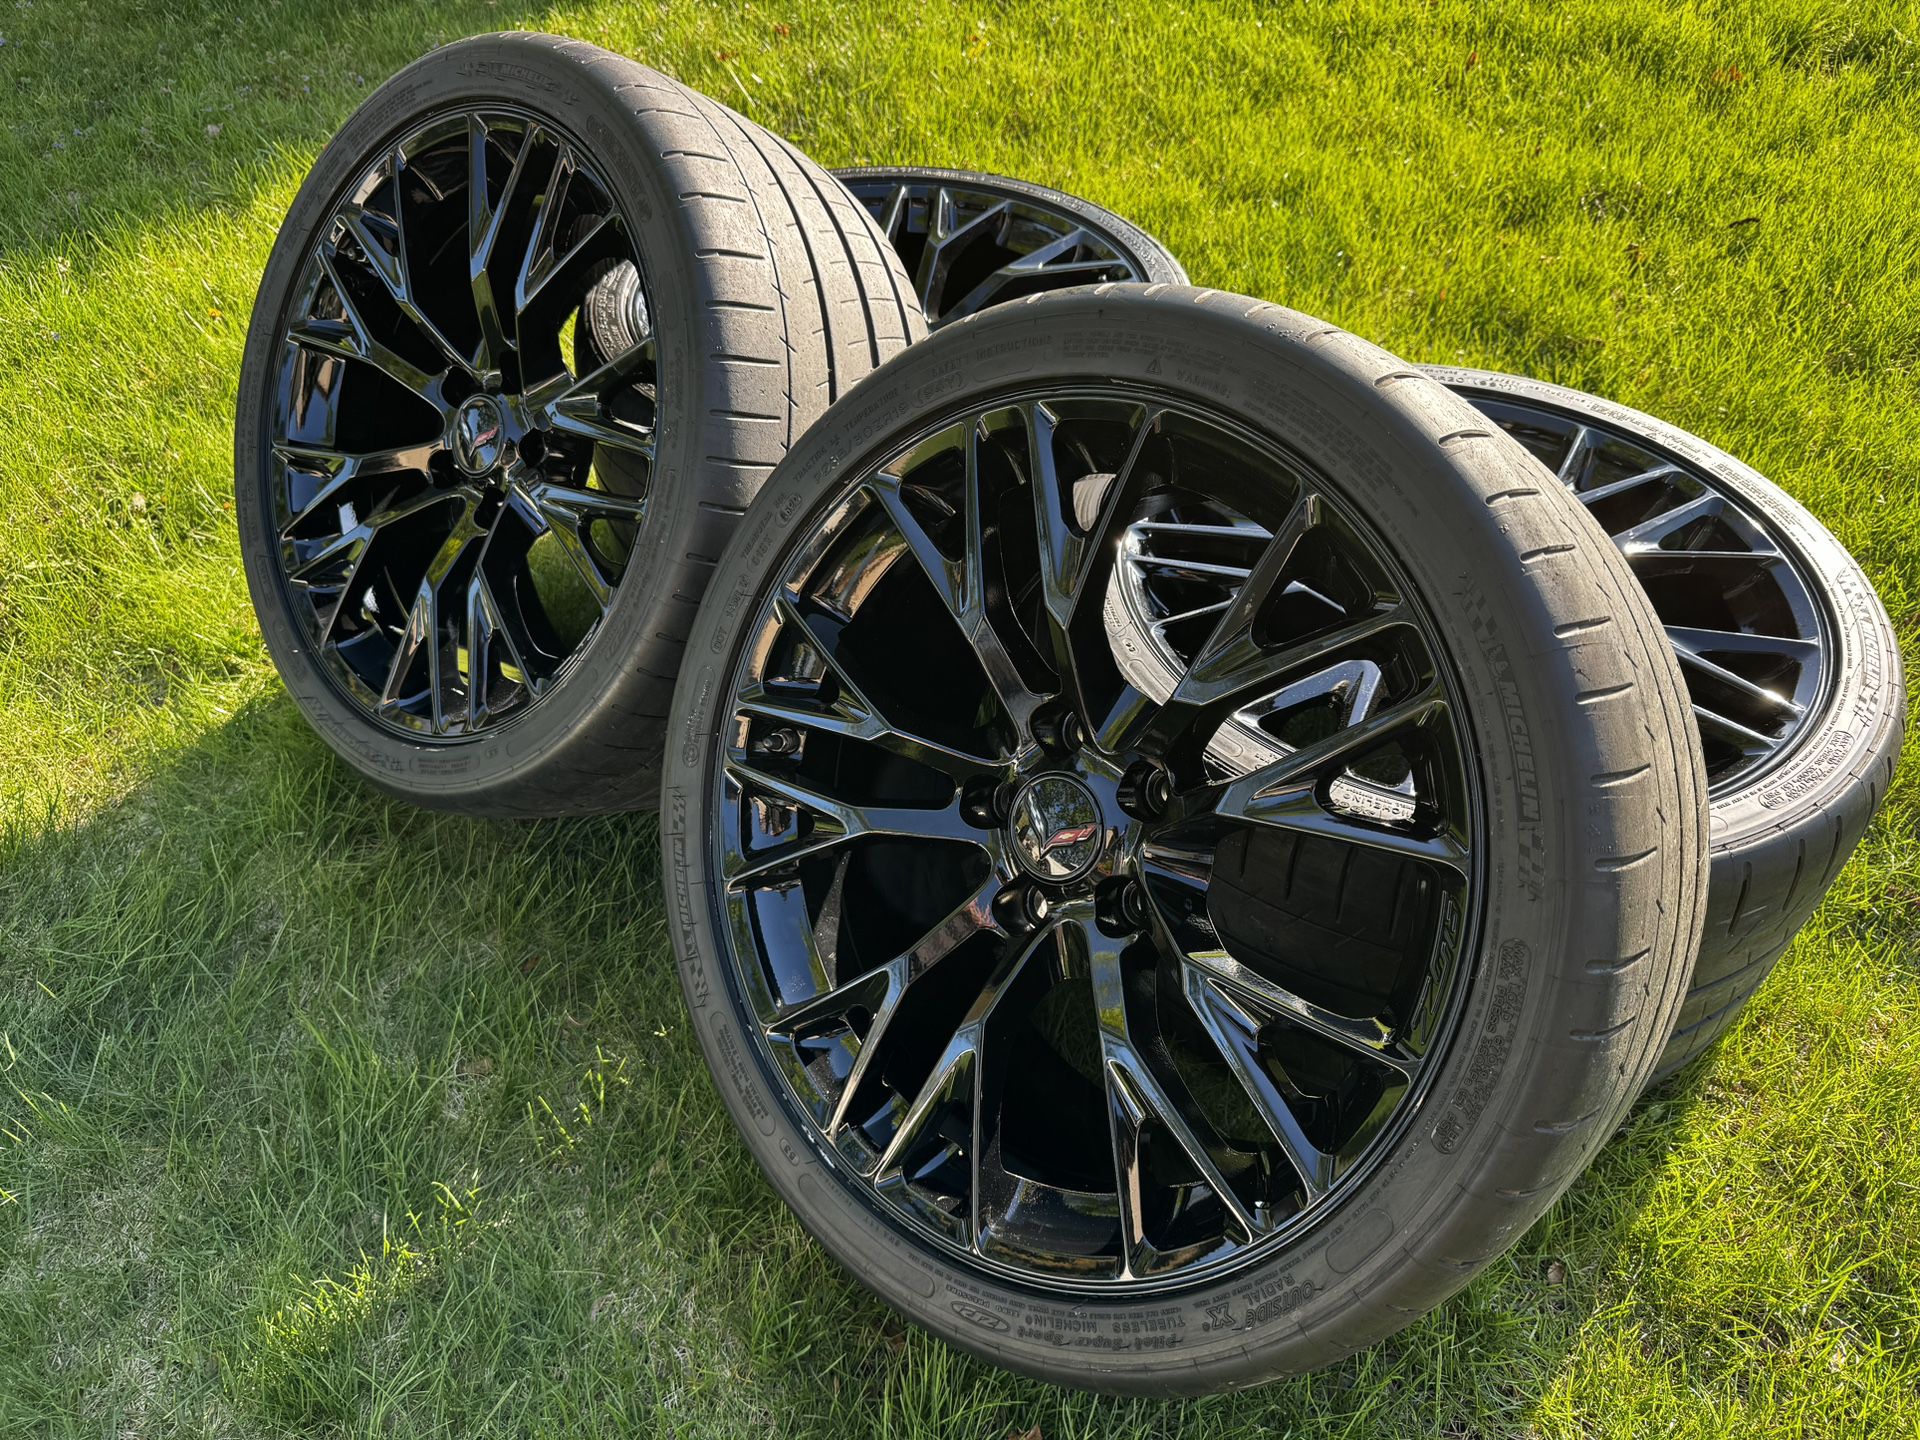 2015 Chevy Corvette Z06 OEM Wheels and Tires